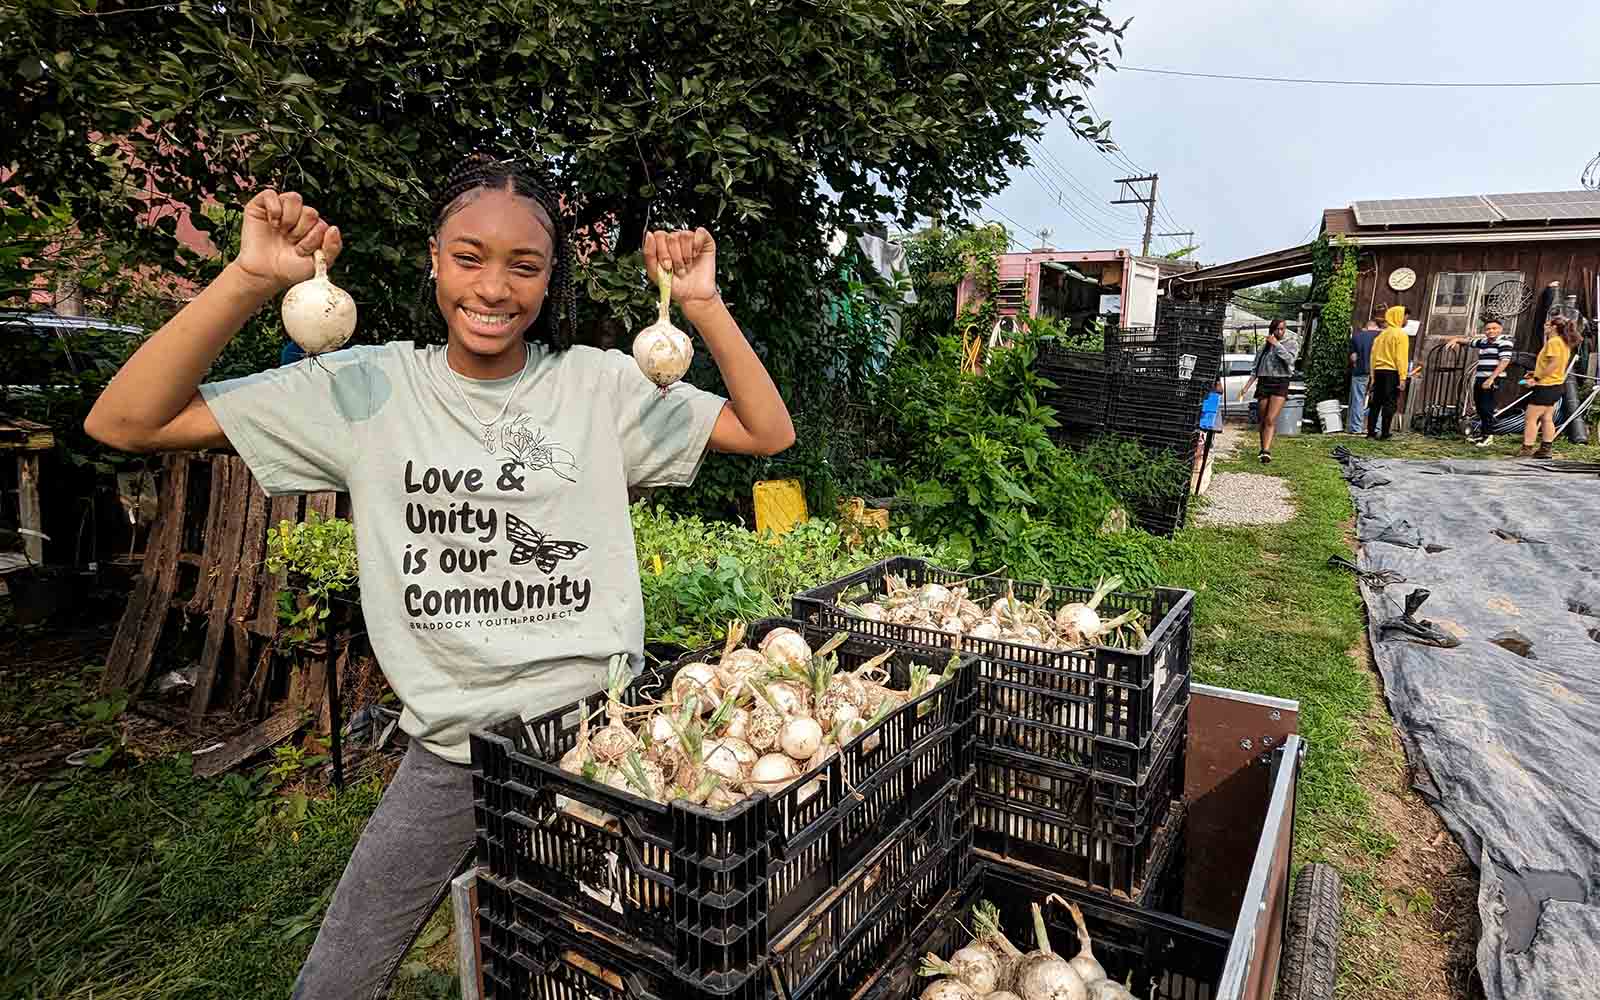 A black teen with small braids holds up two white onions she recently picked, standing in front of a cart full of baskets of onions. Her shirt reads "Love and Unity is our Community Braddock Youth Project."